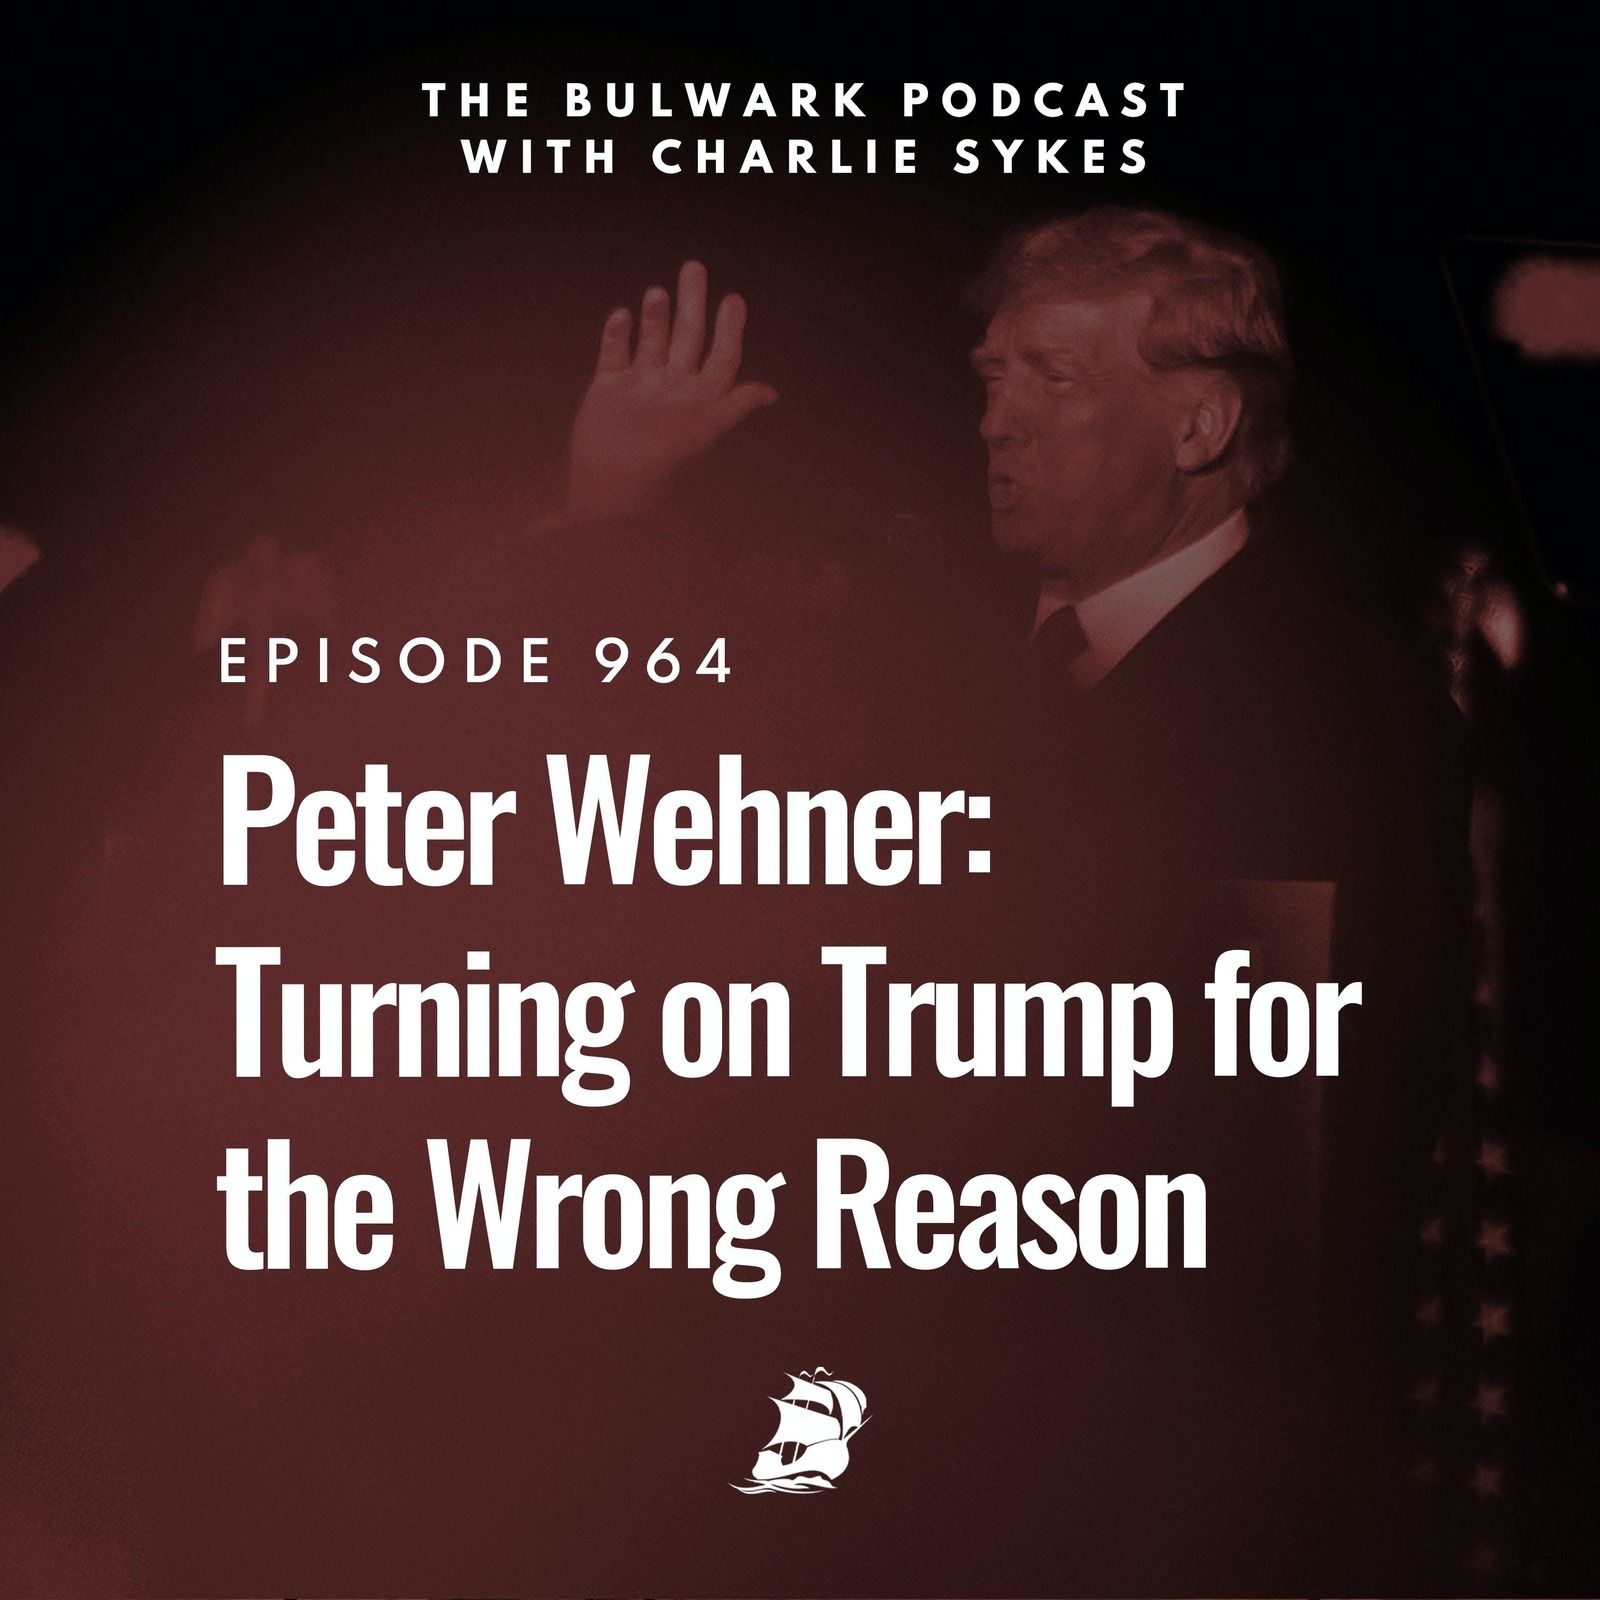 Peter Wehner: Turning on Trump for the Wrong Reason by The Bulwark Podcast